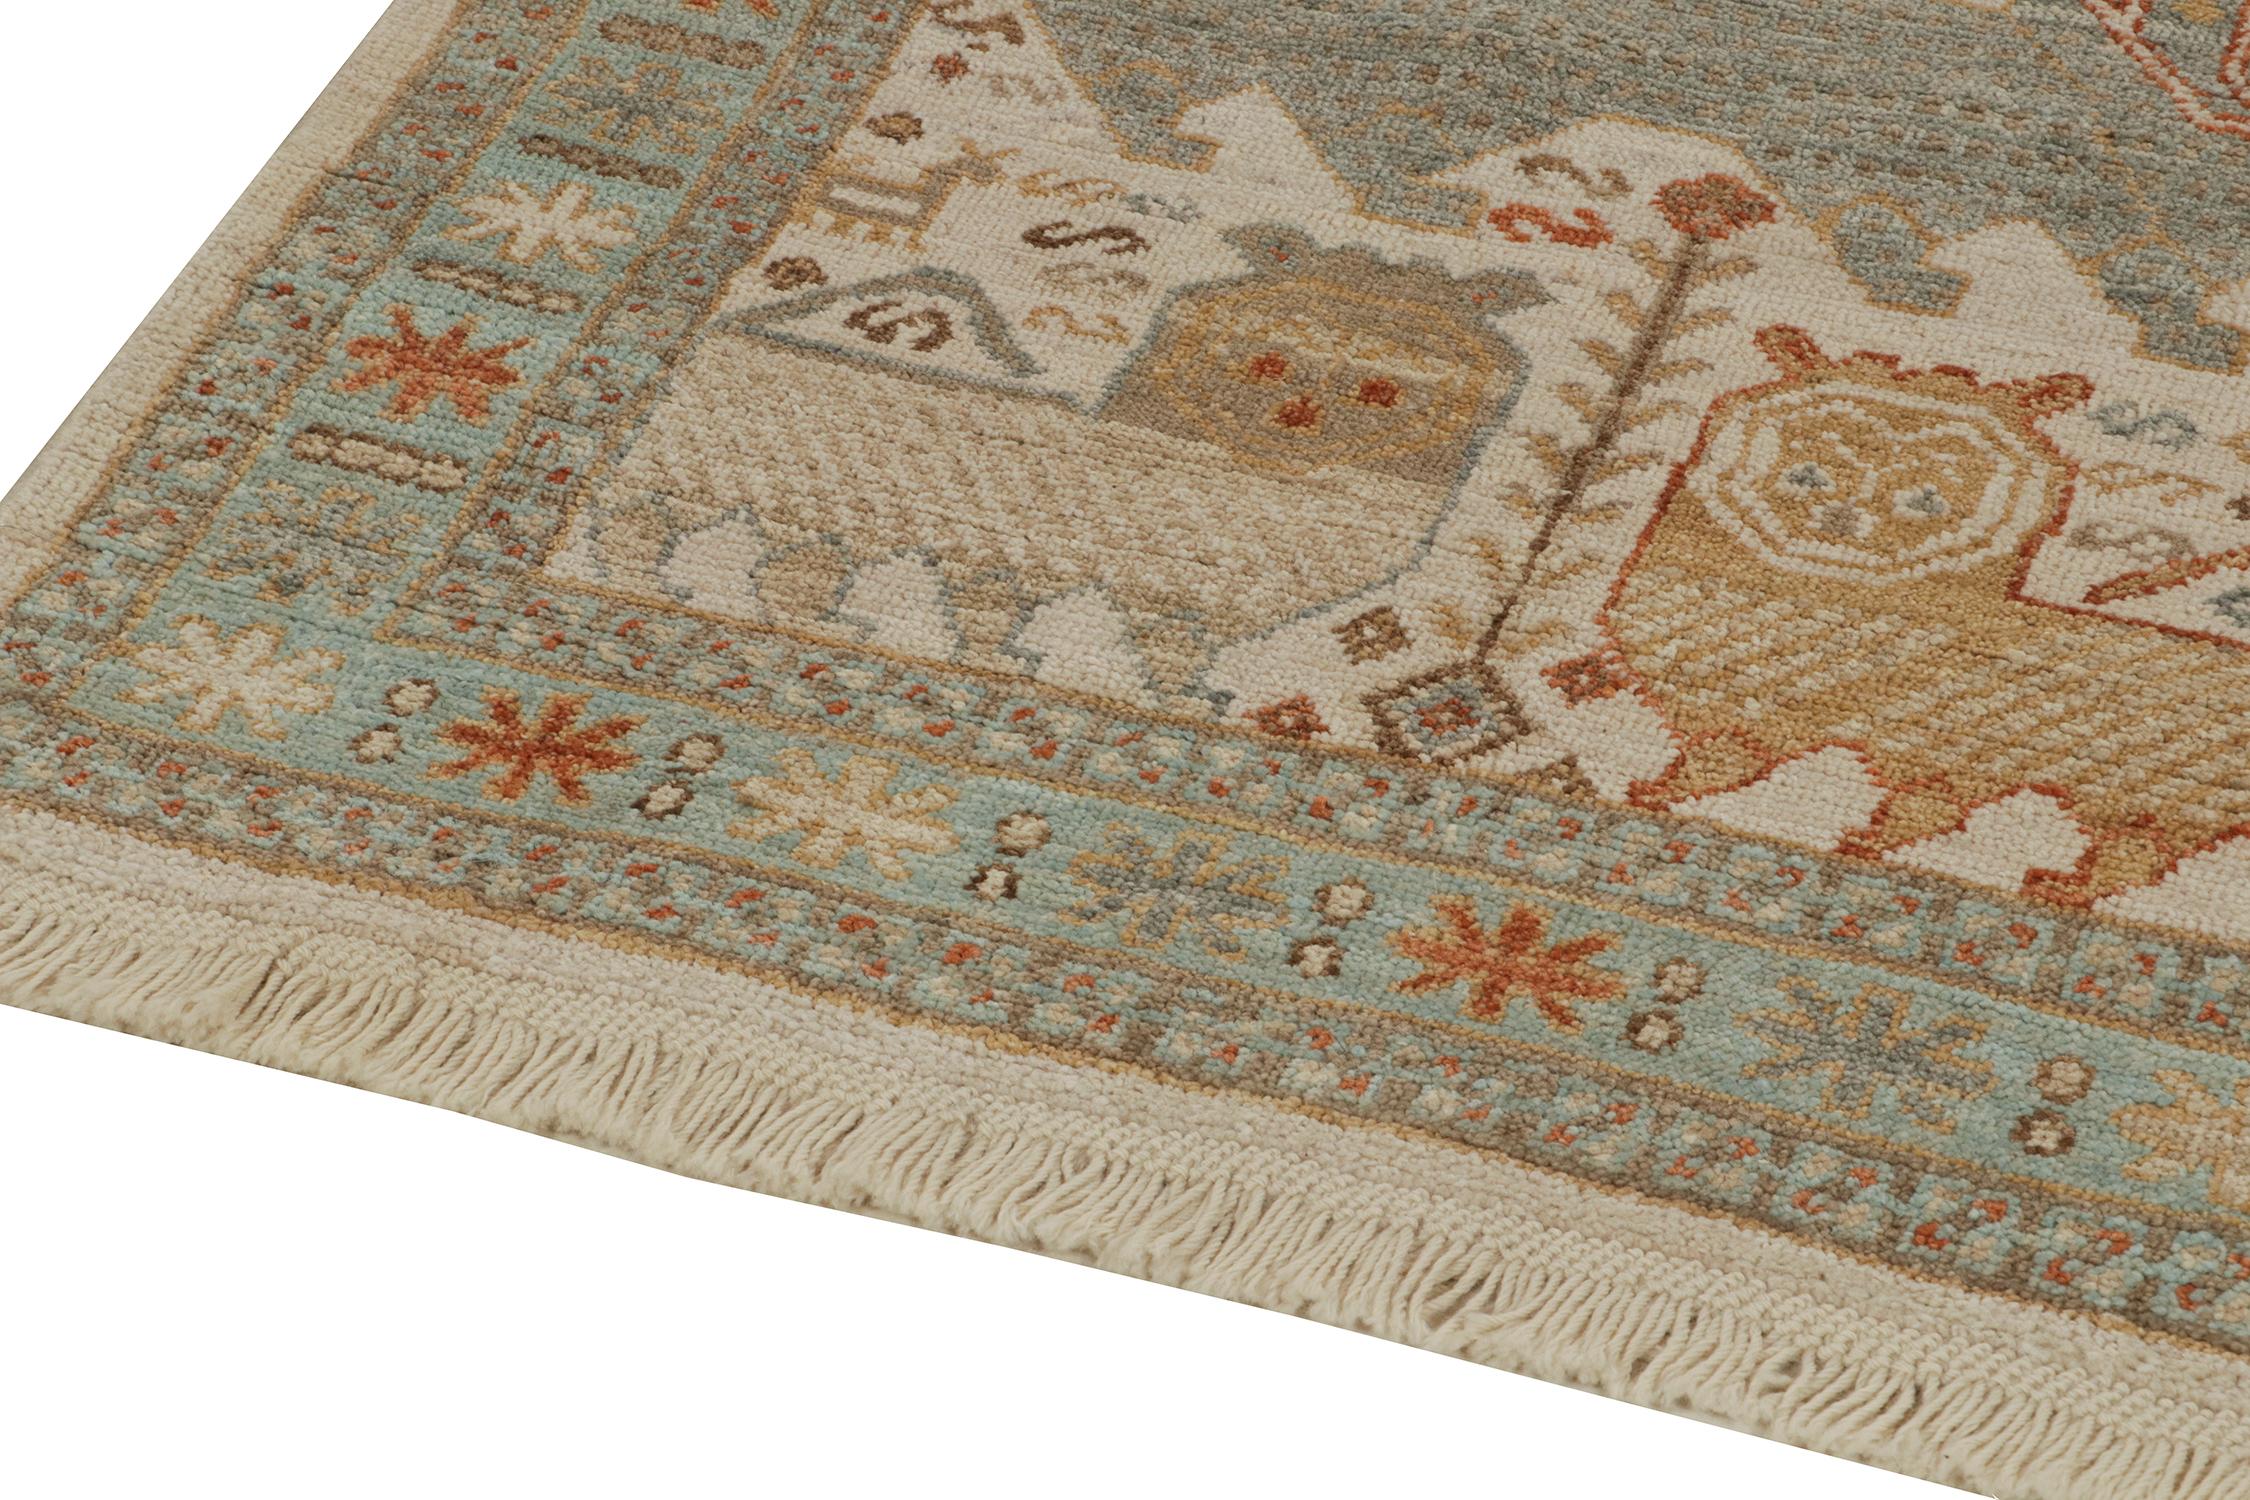  Rug & Kilim’s Tribal style runner in Beige-Brown, Blue and Red Pictorials In New Condition For Sale In Long Island City, NY